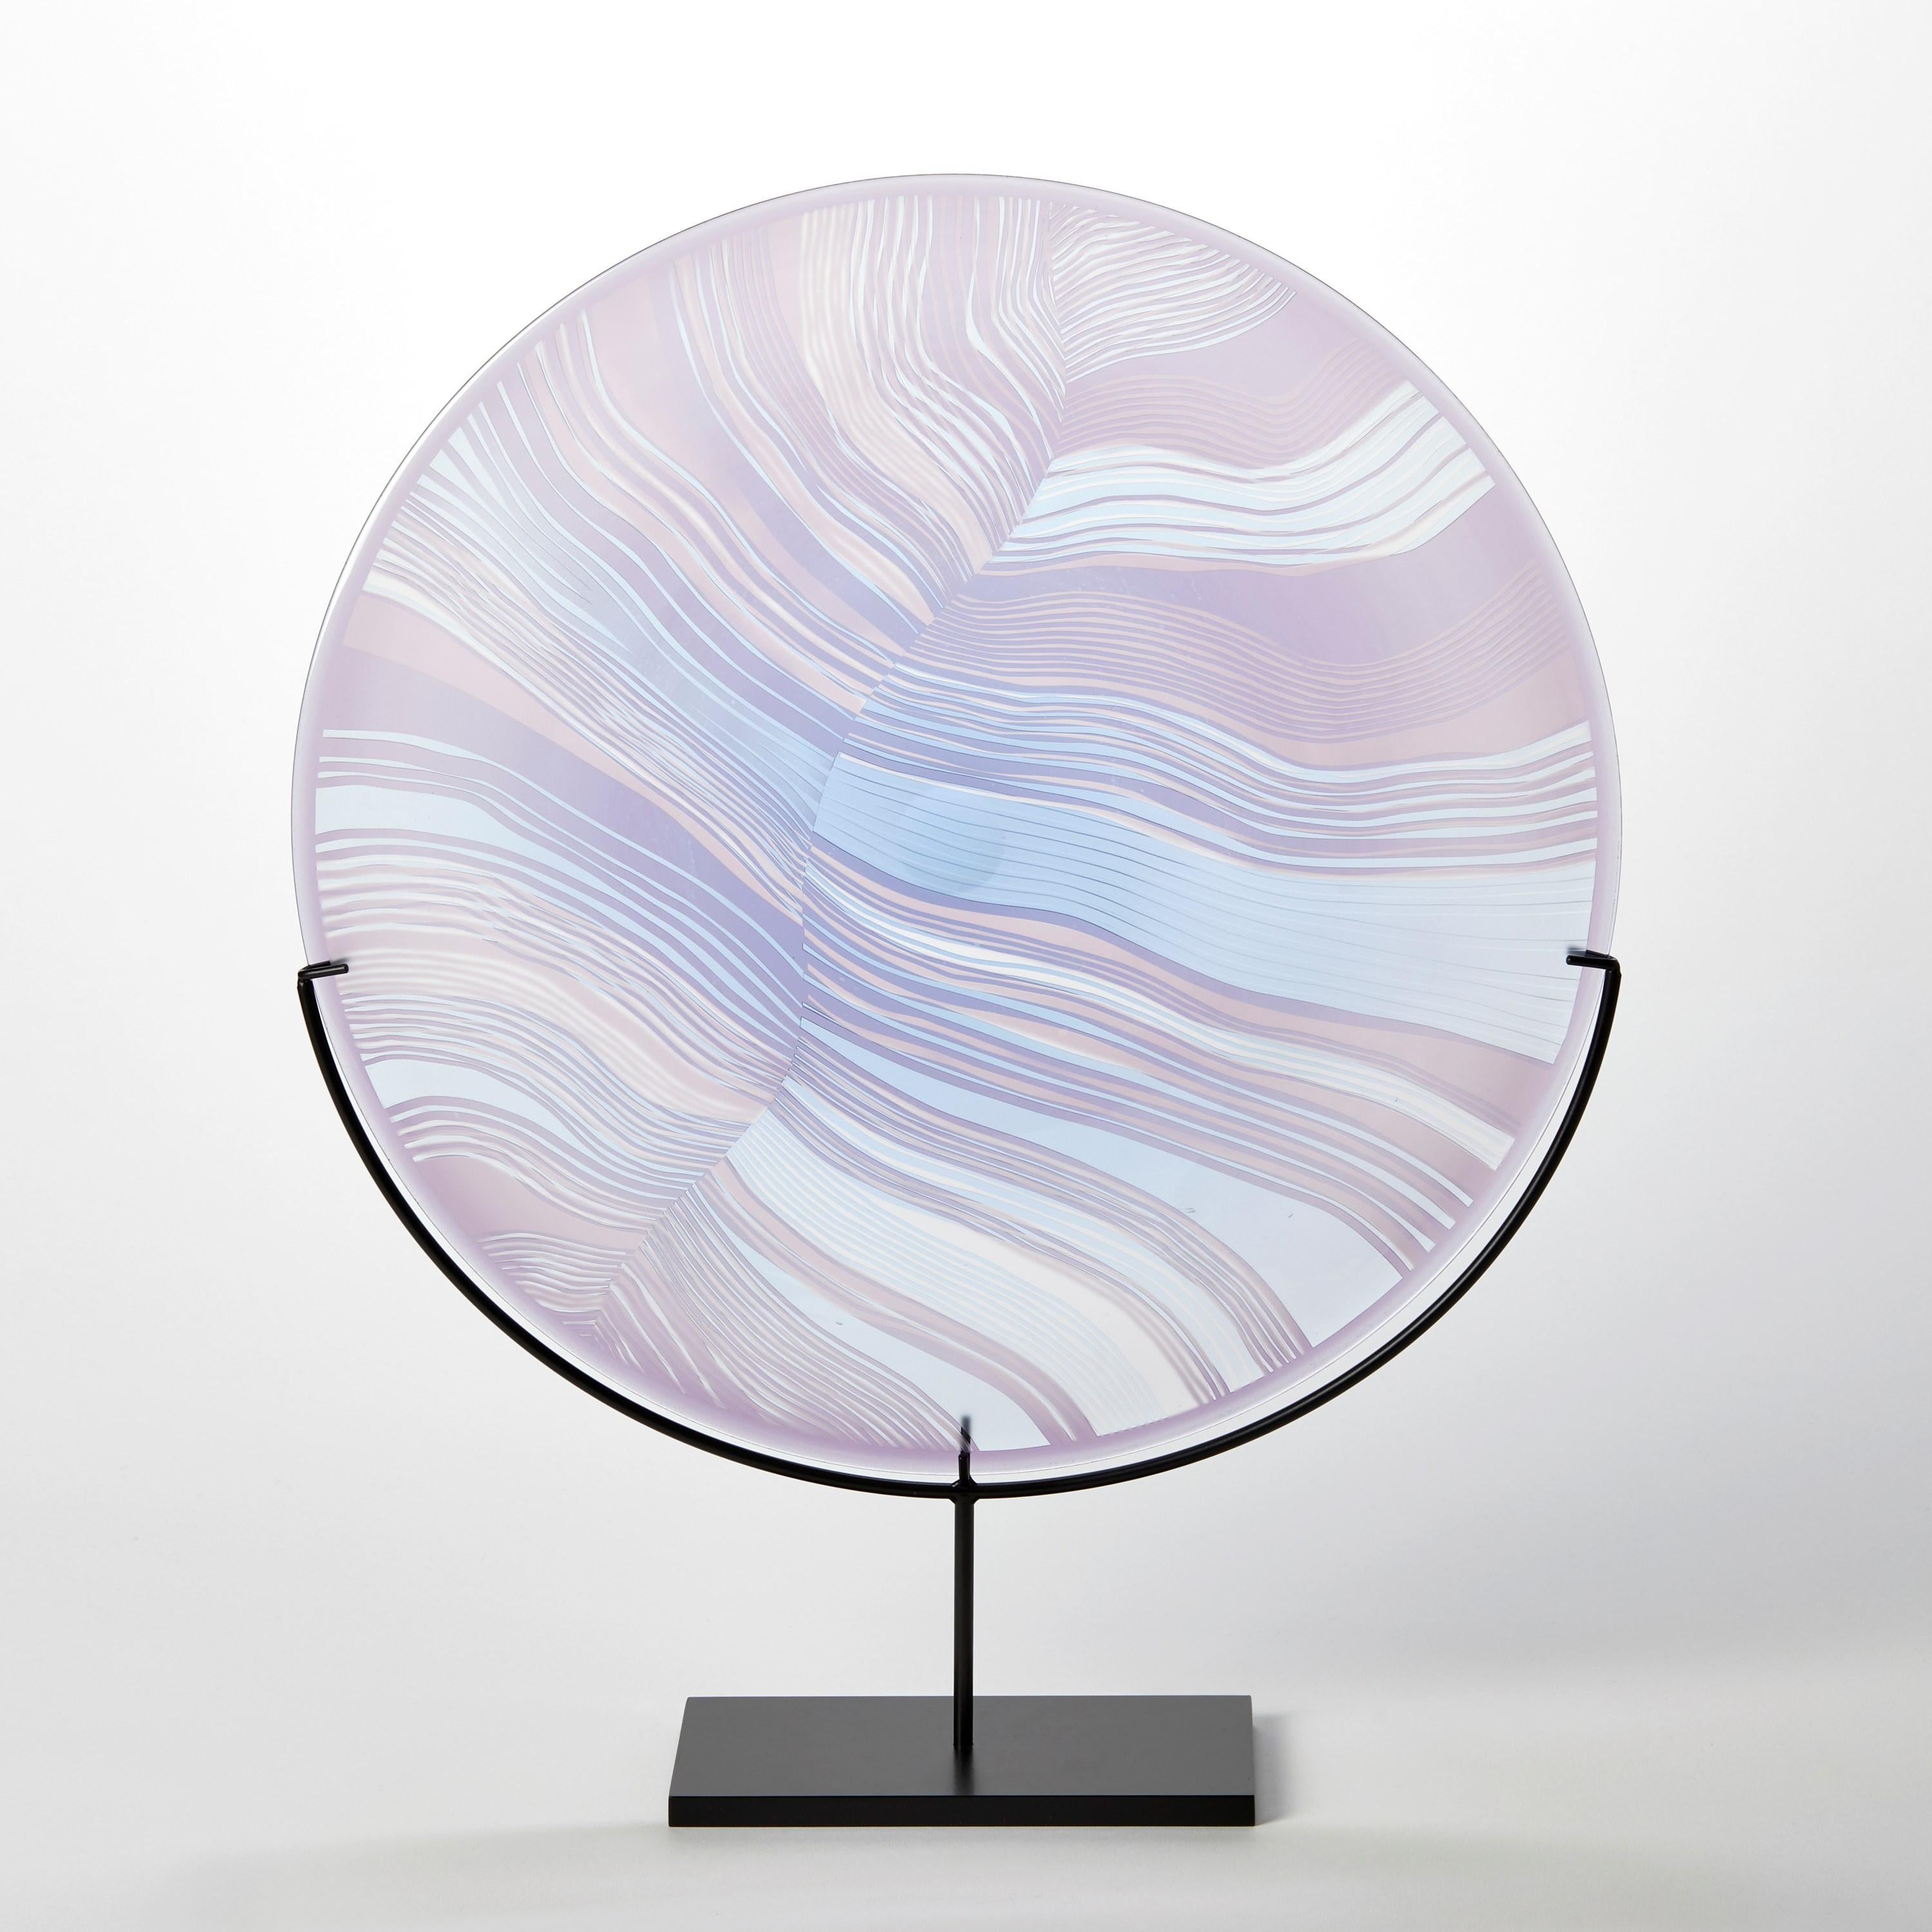 'Solar Storm Sky Blue over Lilac' is a unique handblown and cut glass artwork by the British artist, Kate Jones of Gillies Jones.

In the artist's own words:

“This new body of work references both the evident structure of the landscape and the vast